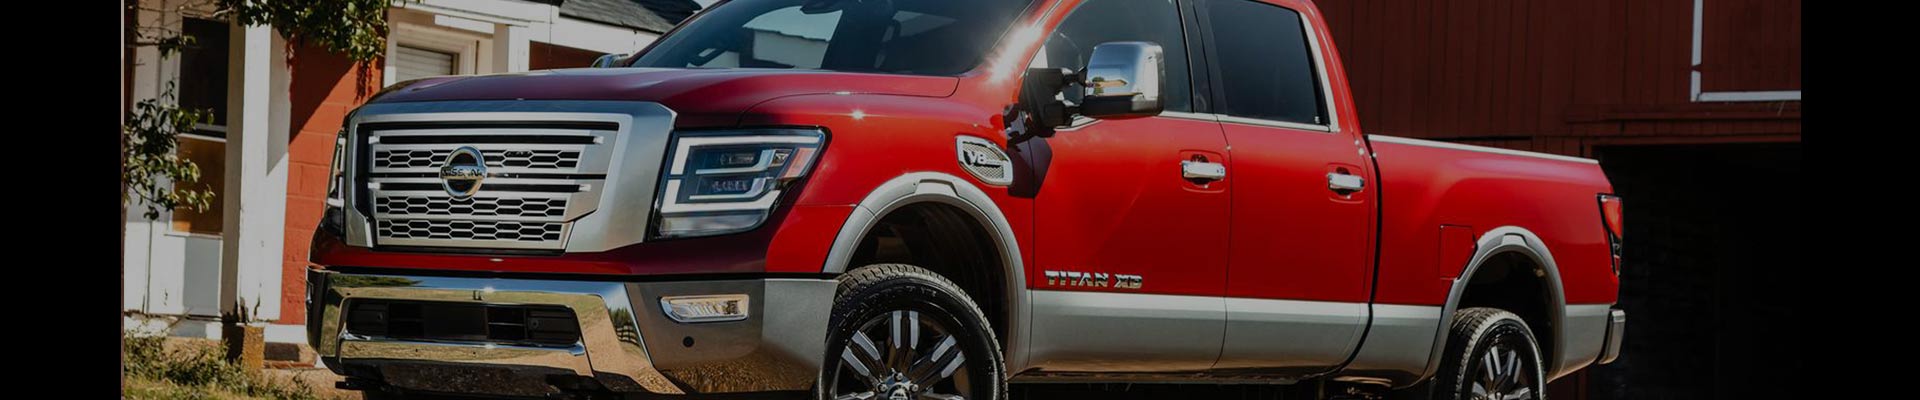 Shop Replacement and OEM 2019 Nissan Titan XD Parts with Discounted Price on the Net